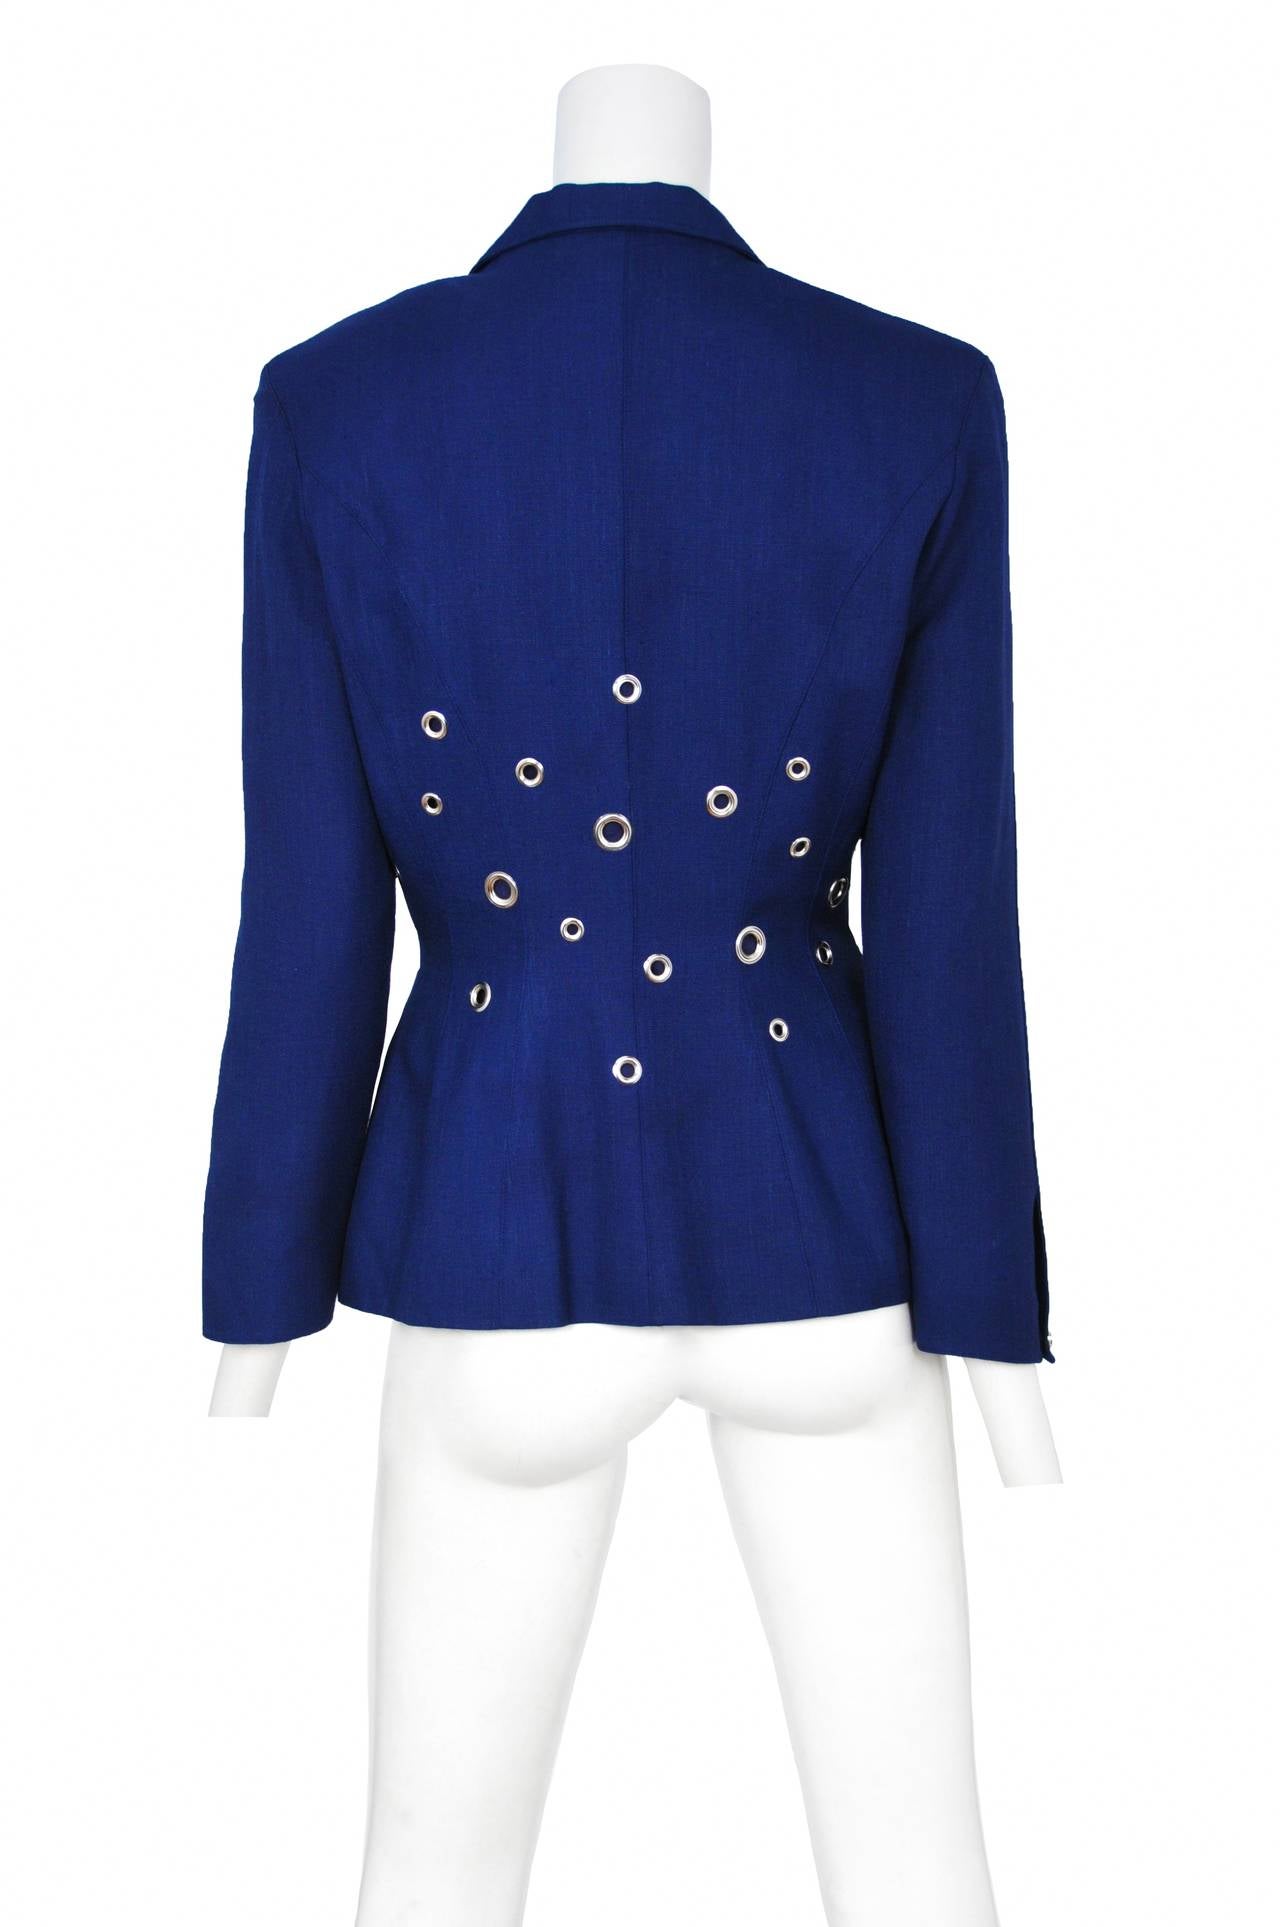 Vintage Thierry Mugler blue linen blazer with various size grommets decorating the waist of the jacket